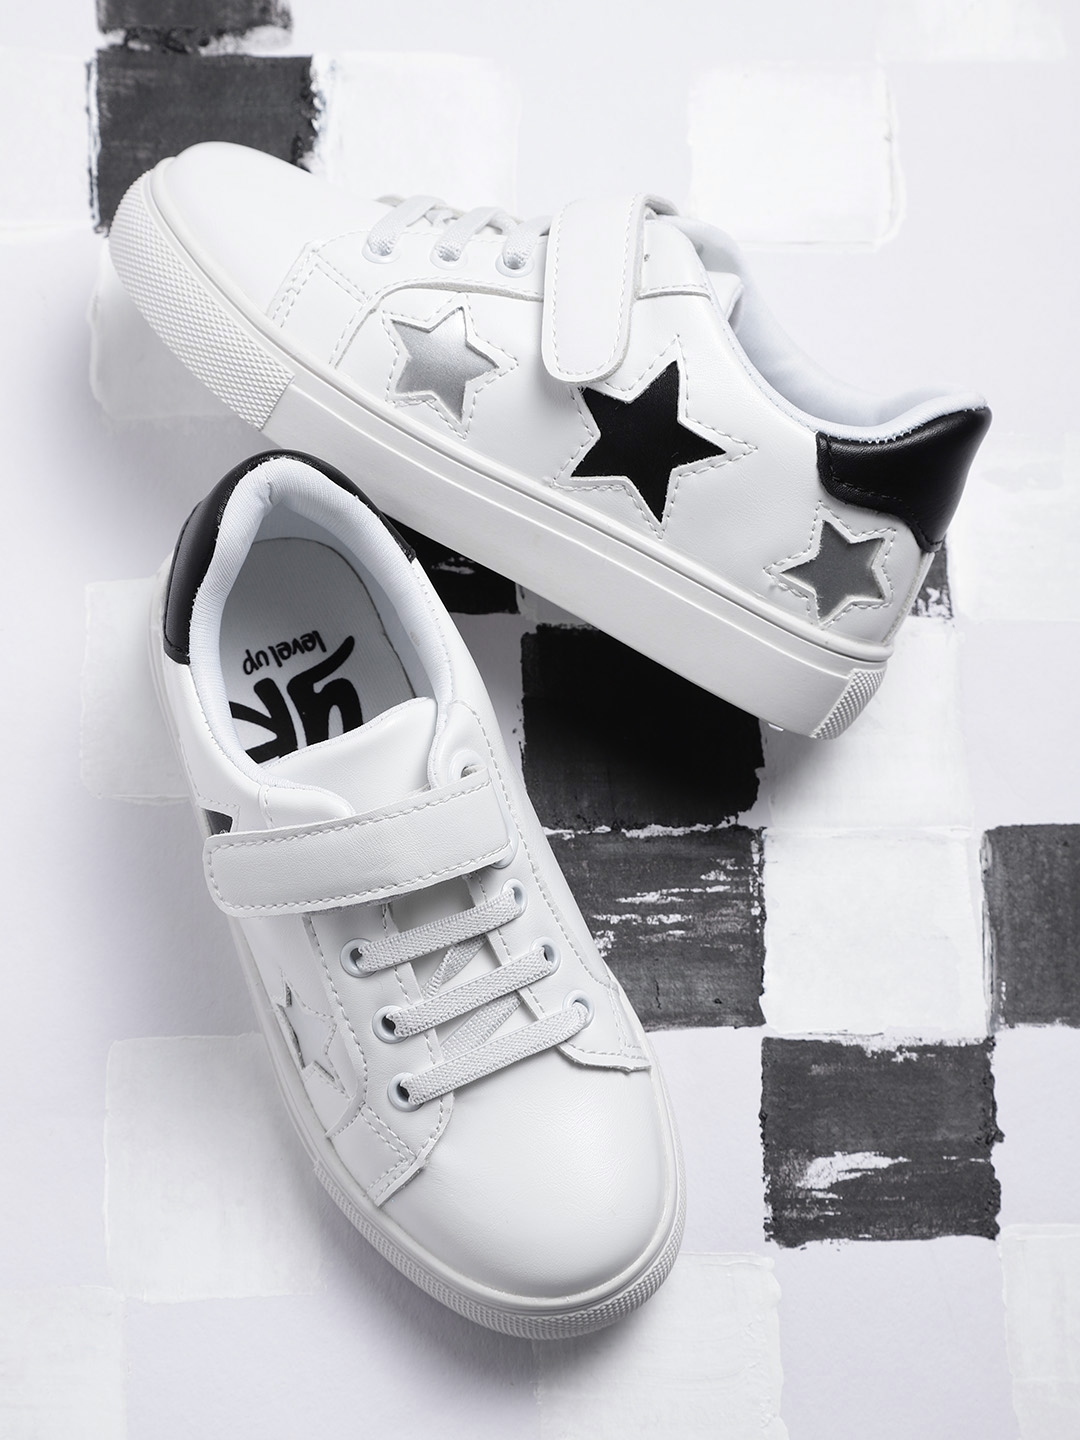 white sneakers for girls